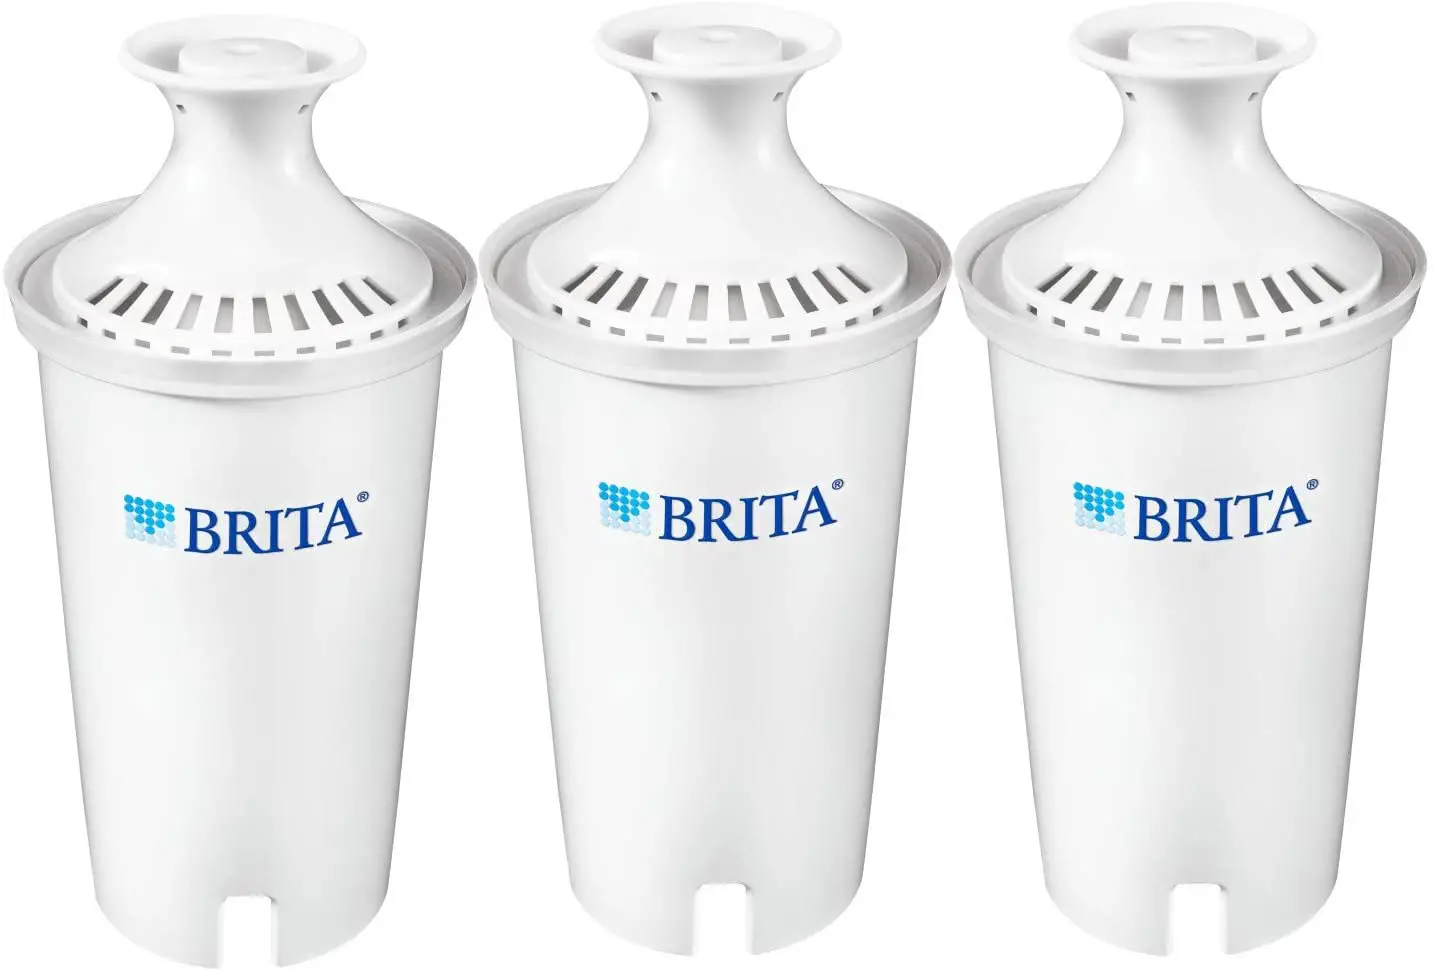 How Long Does Brita Filter Last? How Often to Change Filter?